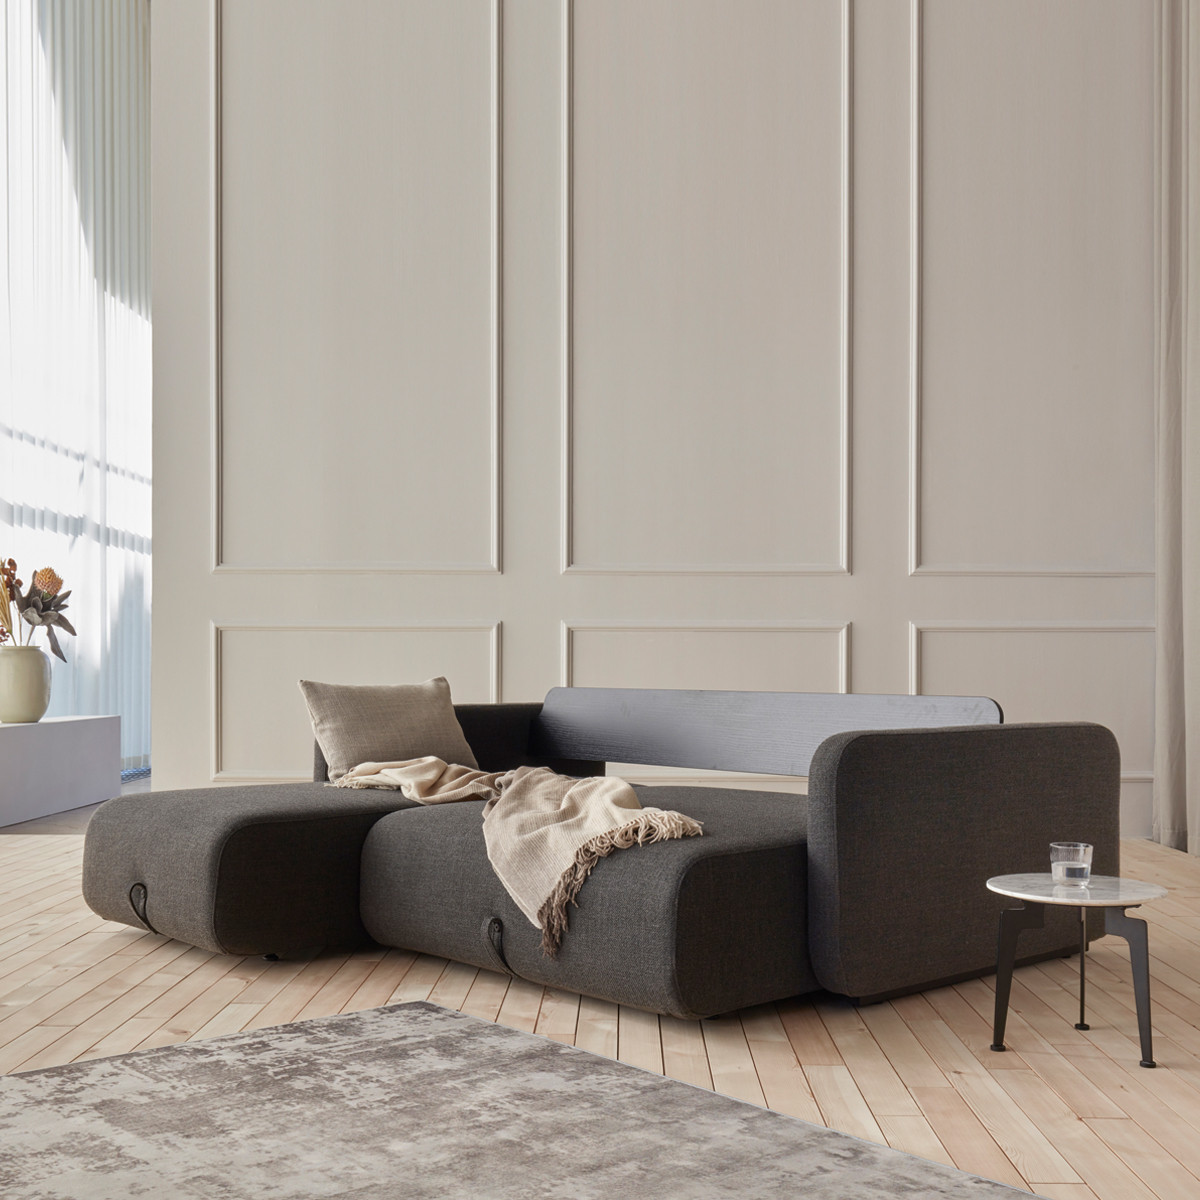 groef Diverse voor Innovation Living Vogan Lounger | Slaapbank chaise longue